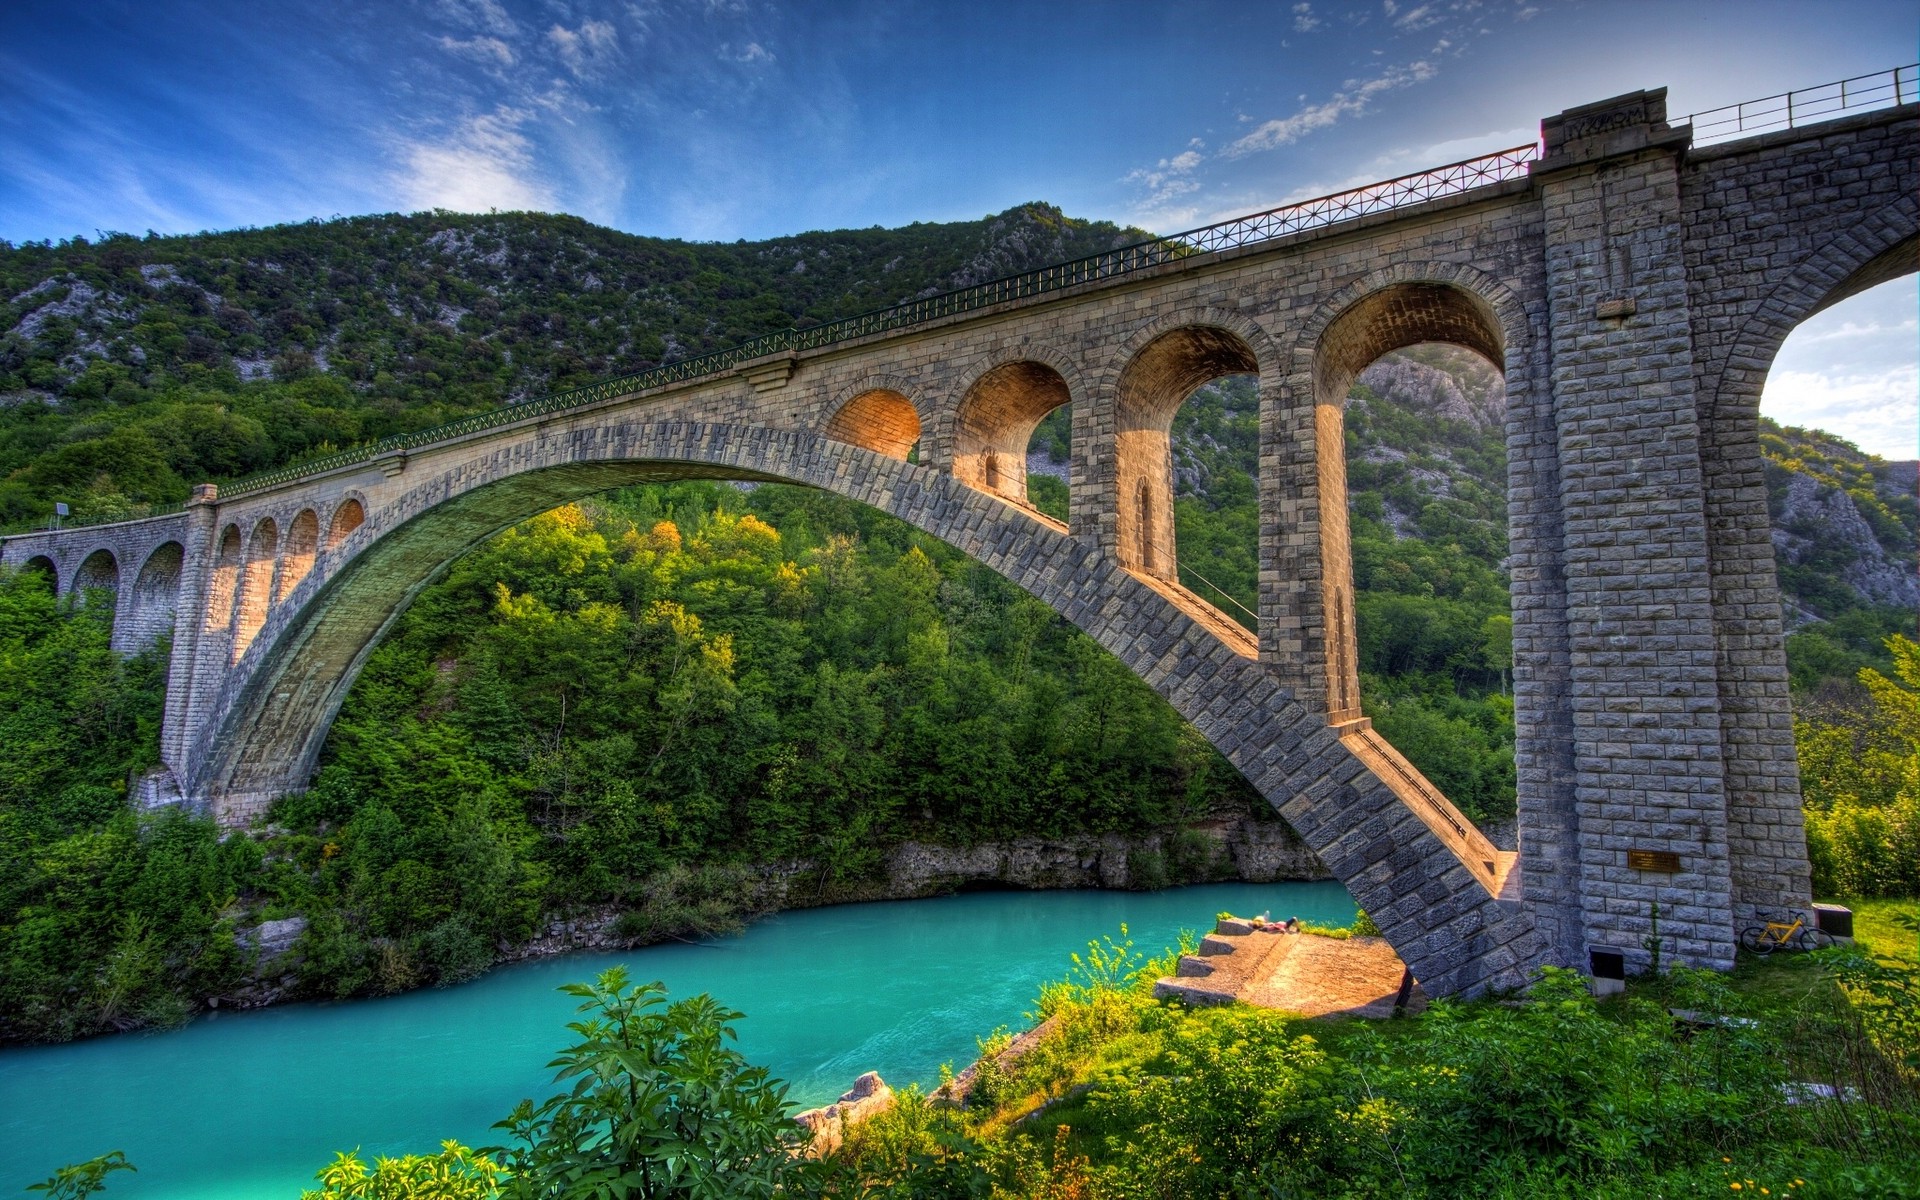 nature, Landscape, Bridge, Architecture, River, Mountain, Forest, Turquoise, Water, Green, Morning, Trees, Shrubs, HDR Wallpaper